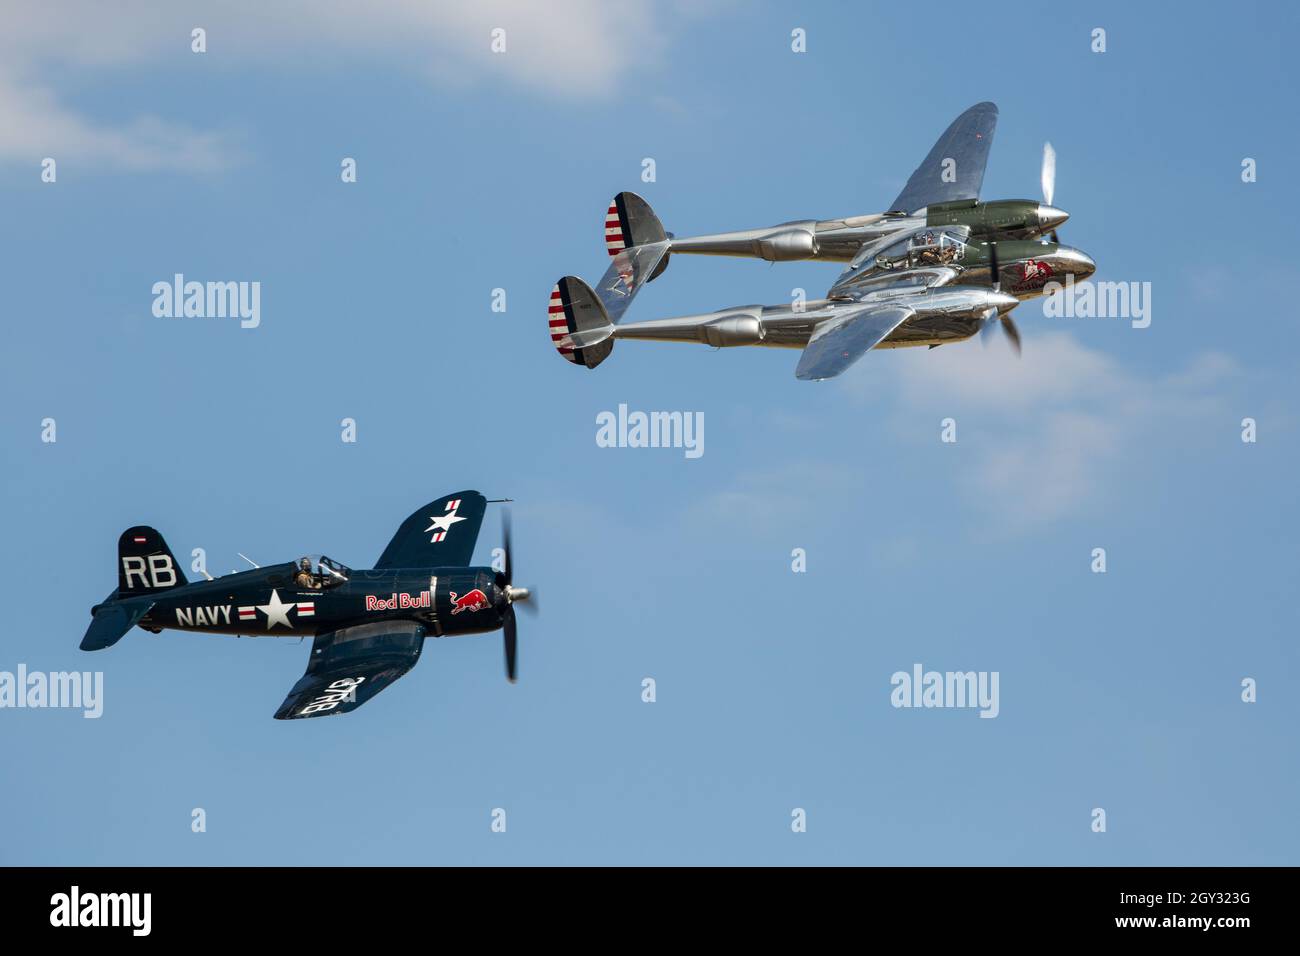 Red Bull Lockheed P38 Lightning and Vought FG1d Corsair Vintage WW2 Fighter at Flying Legends Duxford Airshow Stock Photo